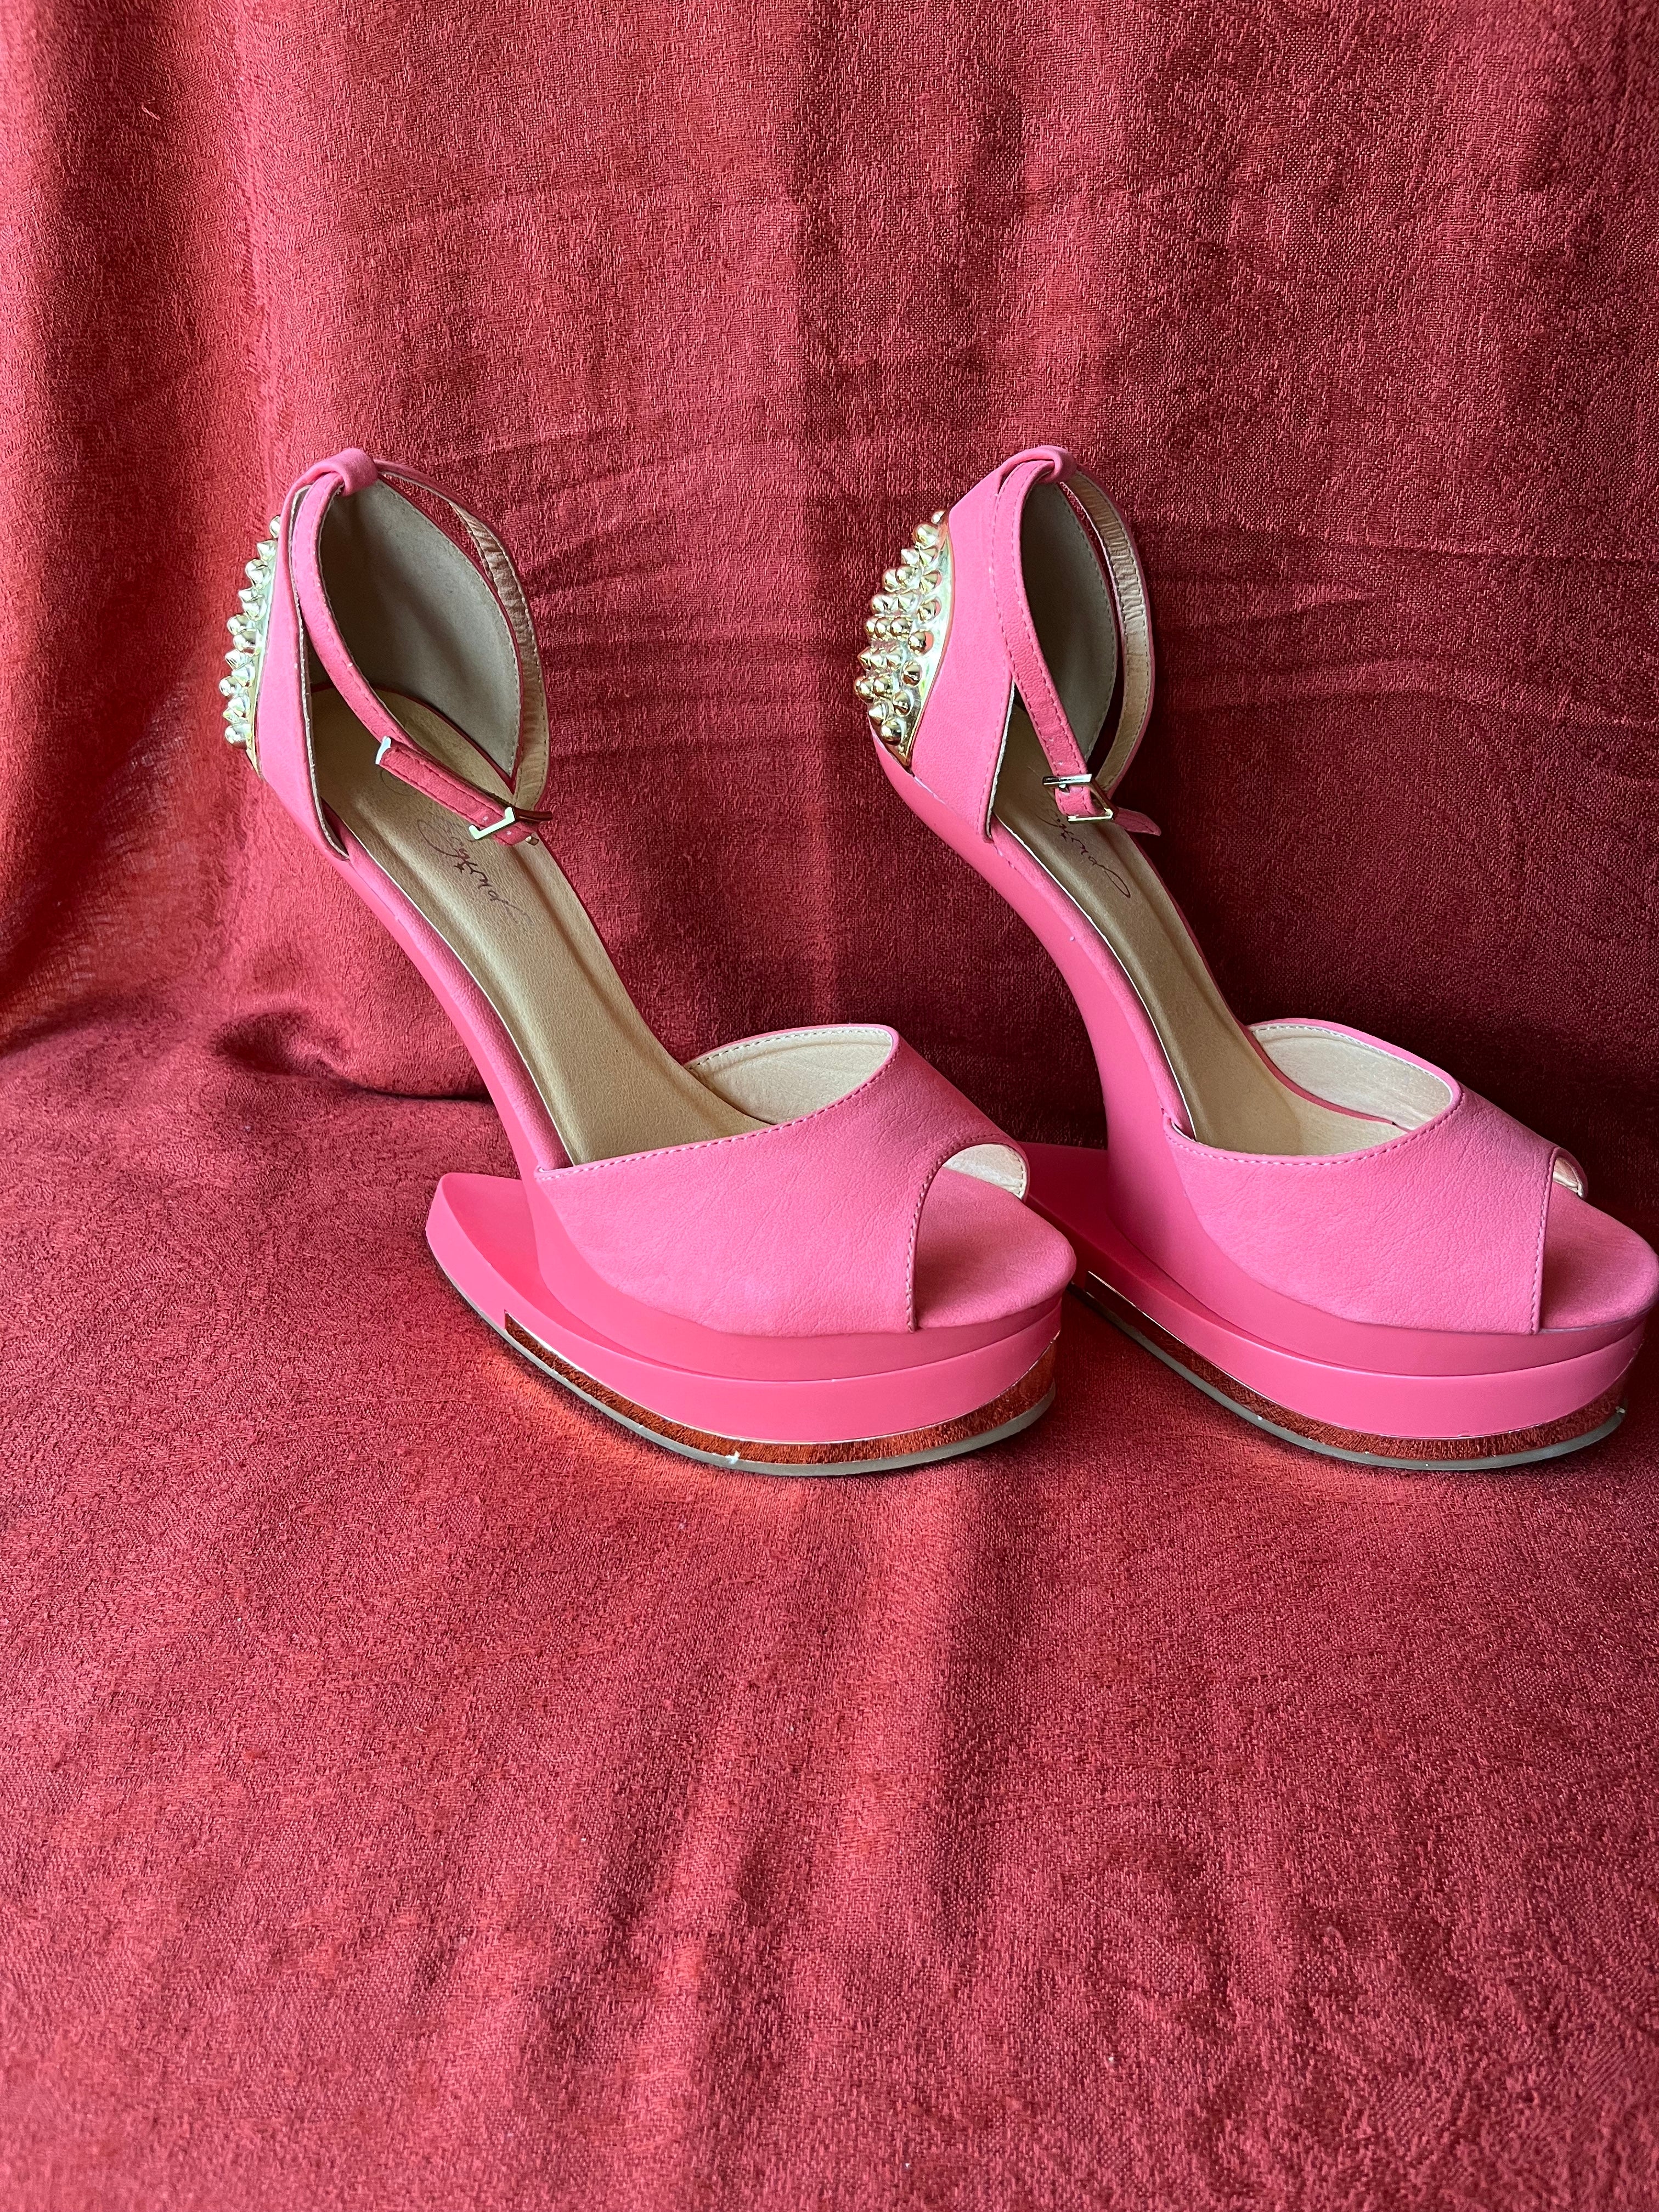 New and used Stilettos for sale | Facebook Marketplace | Facebook